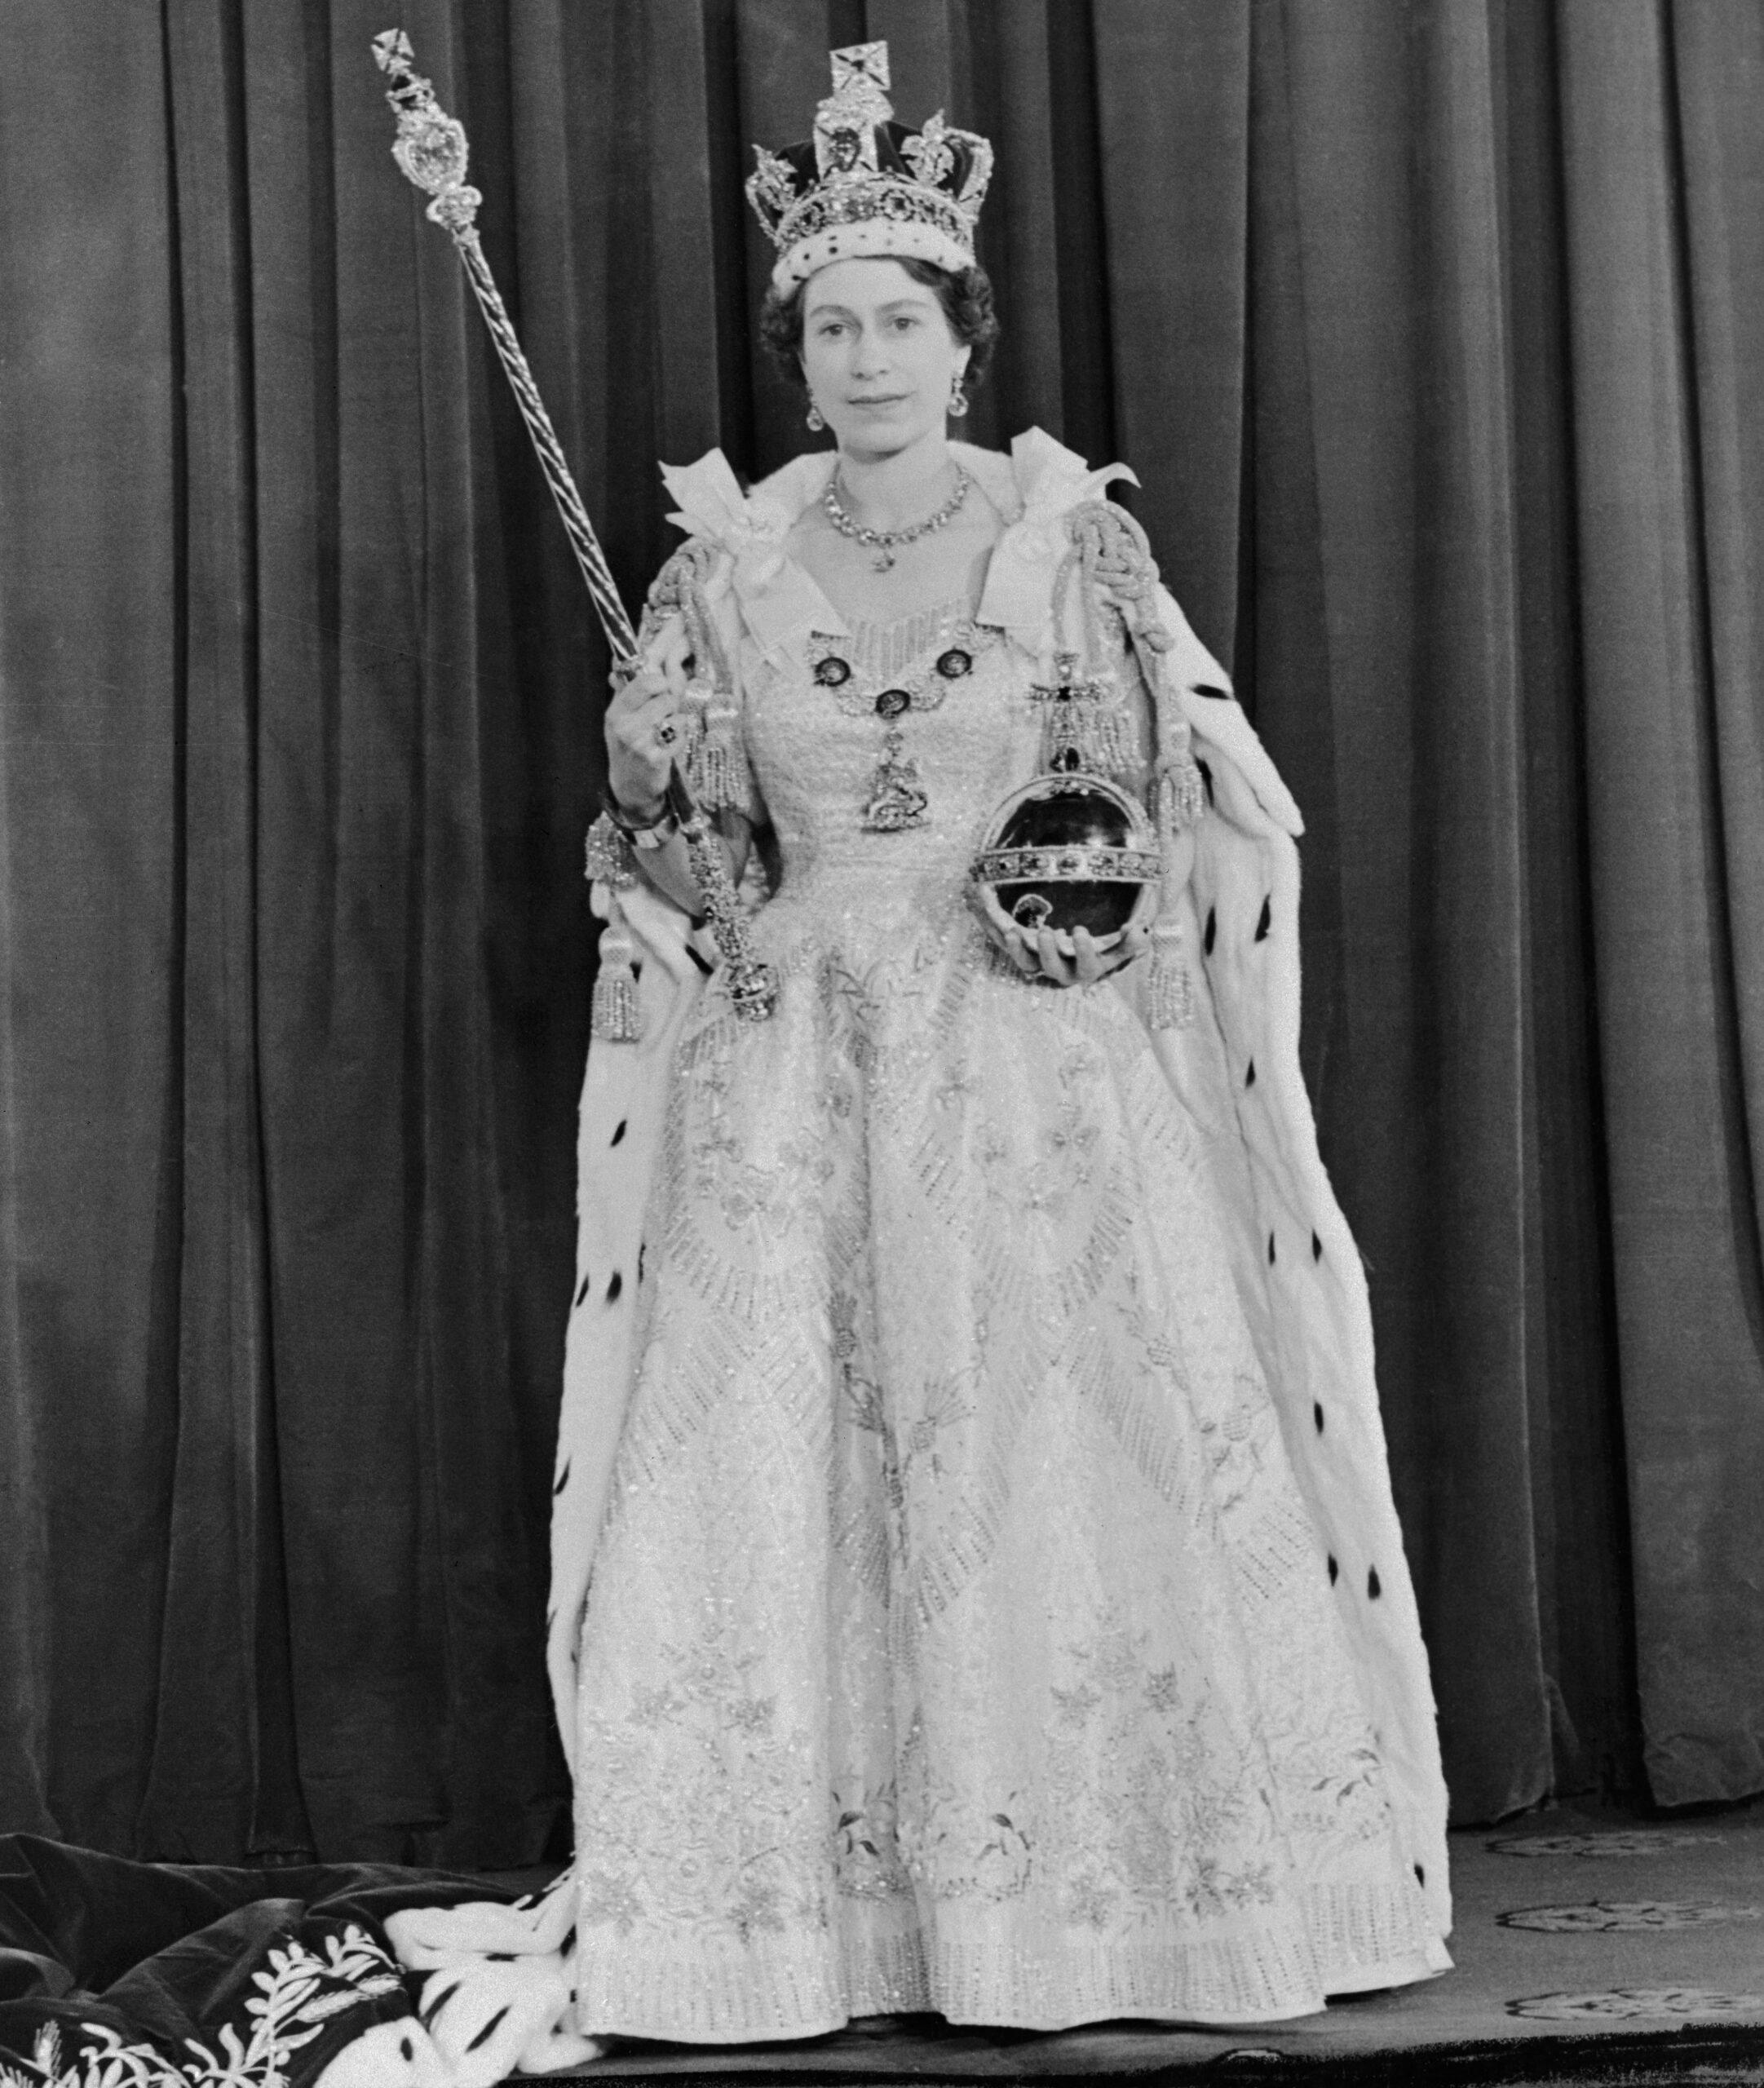 A rumor said that Queen Elizabeth II owned a stolen diamond known as the Great Star of Africa that came from South Africa.